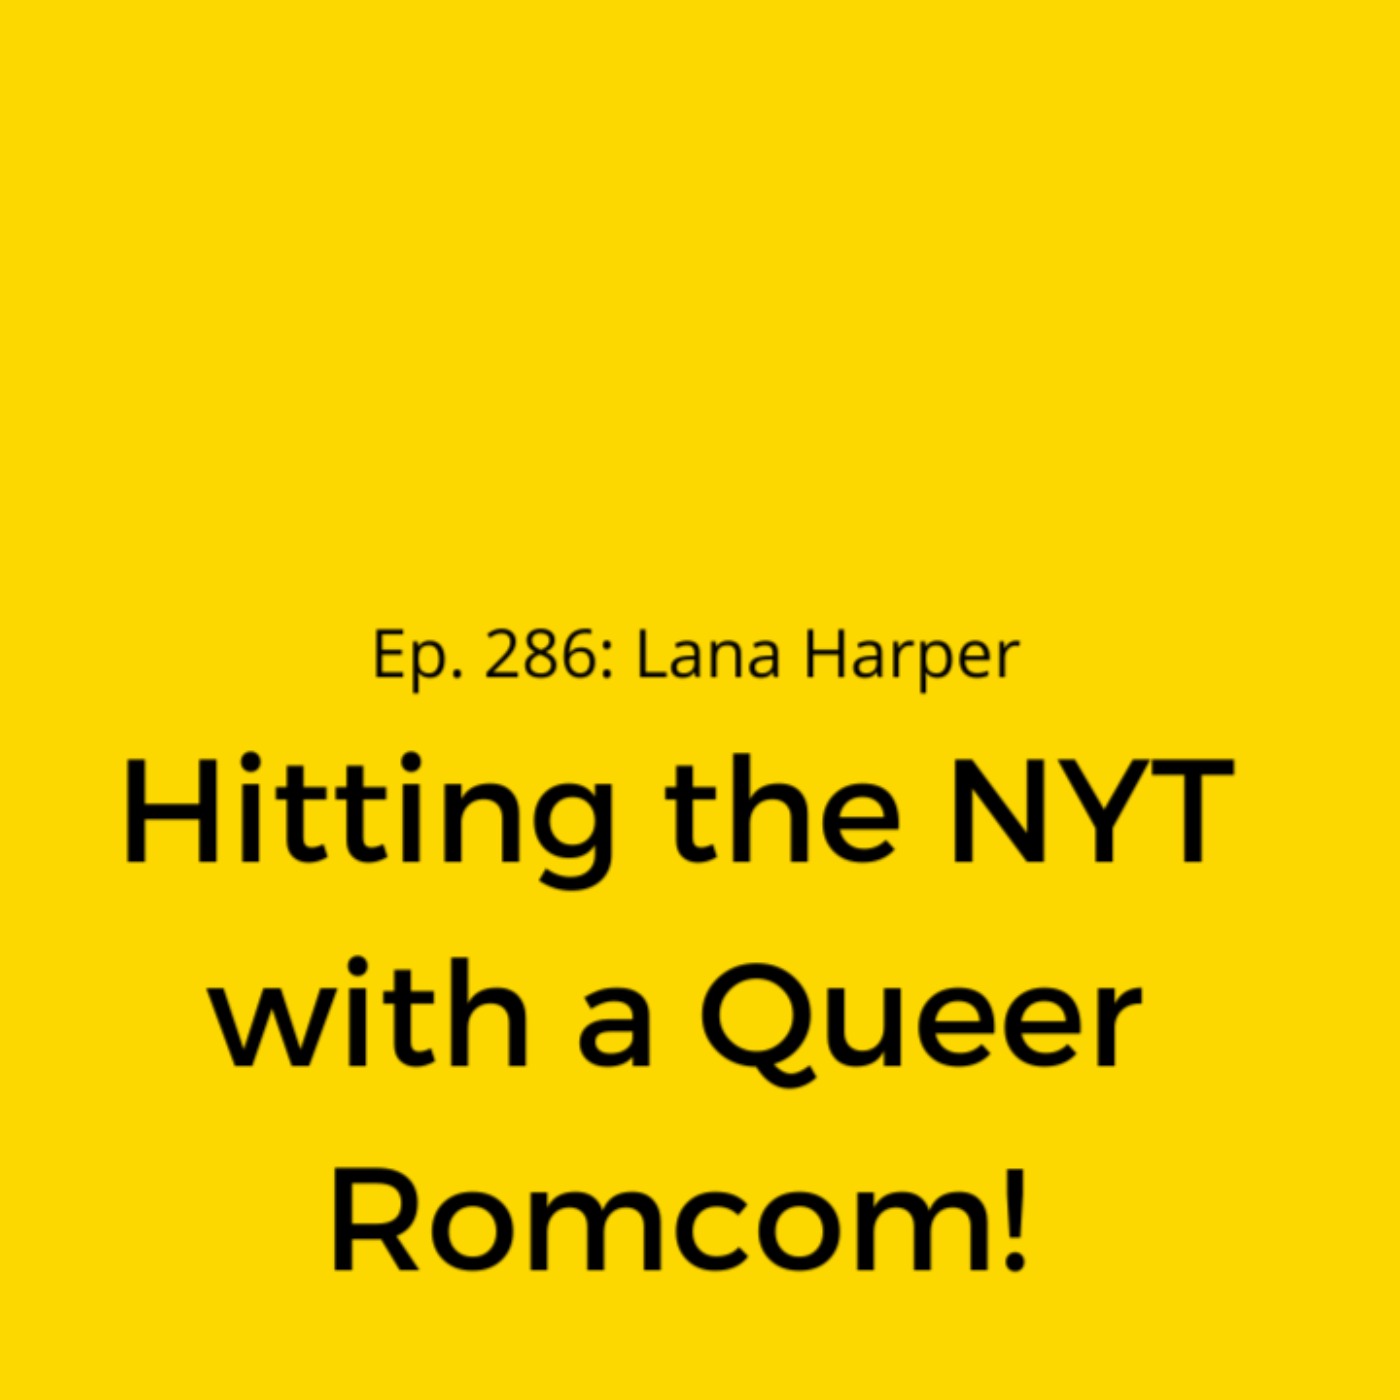 Ep. 286: Lana Harper On Hitting the NYT with a Queer Romcom!